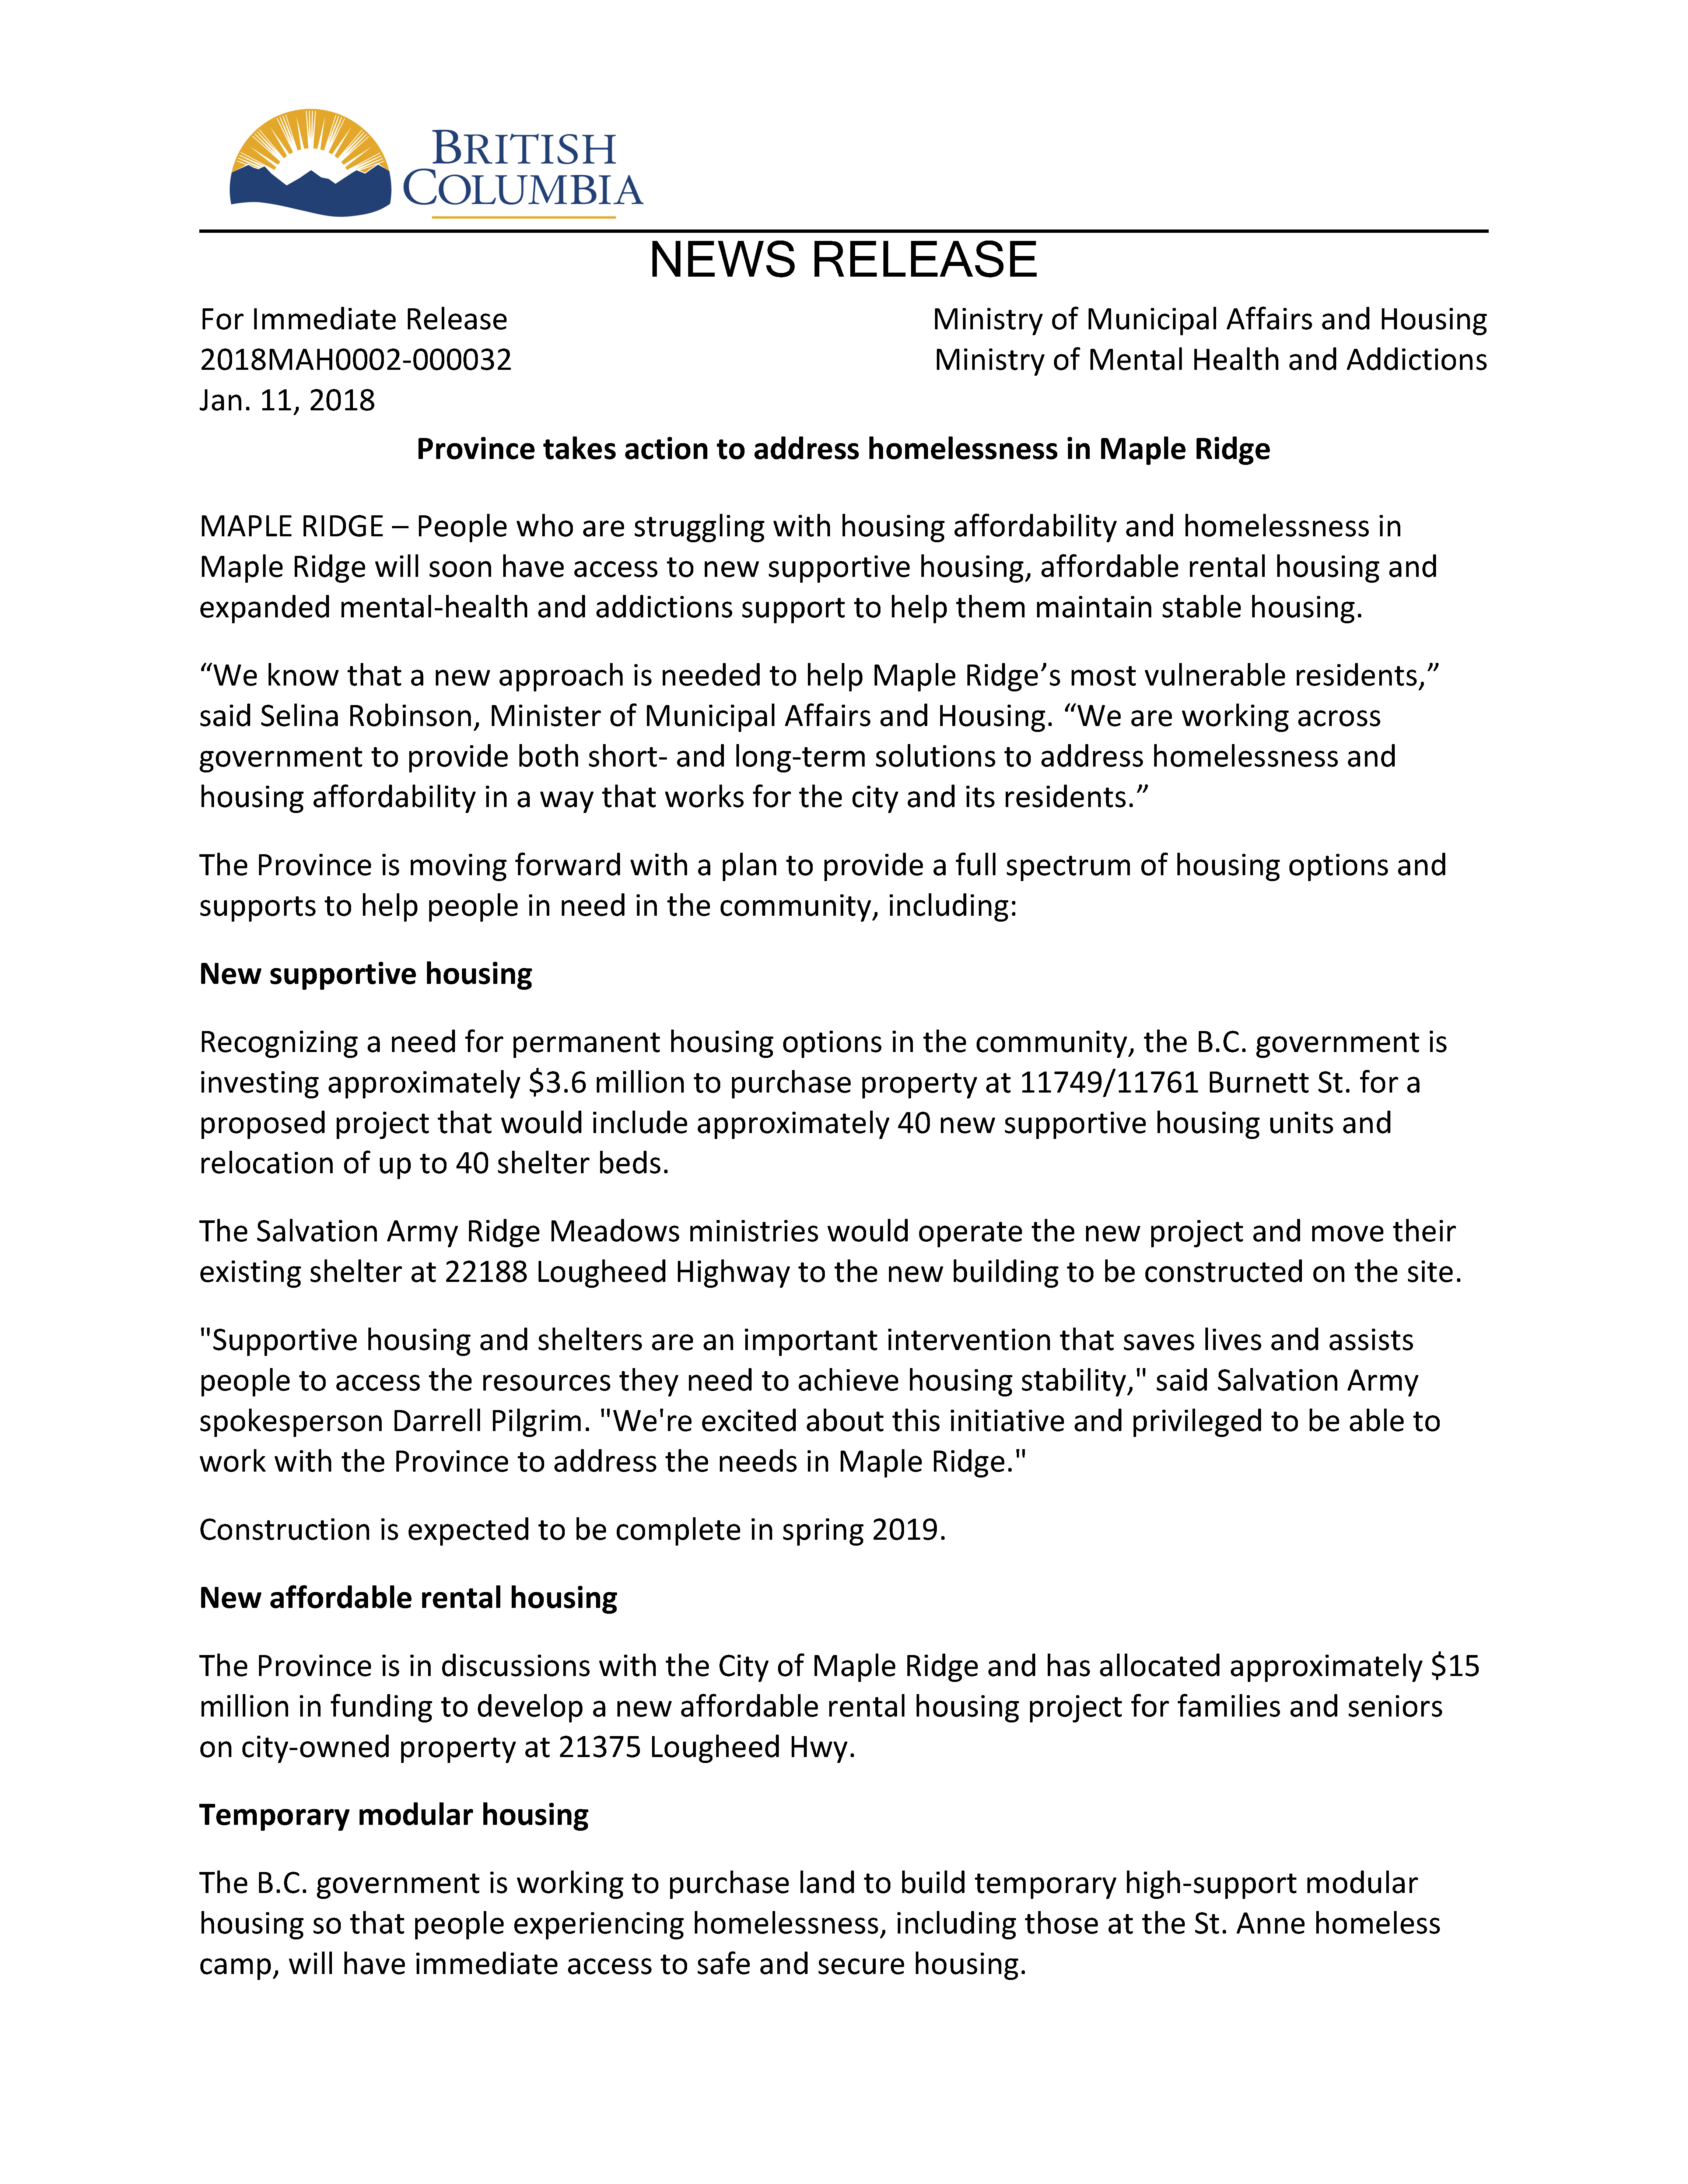 BC Housing Press Release